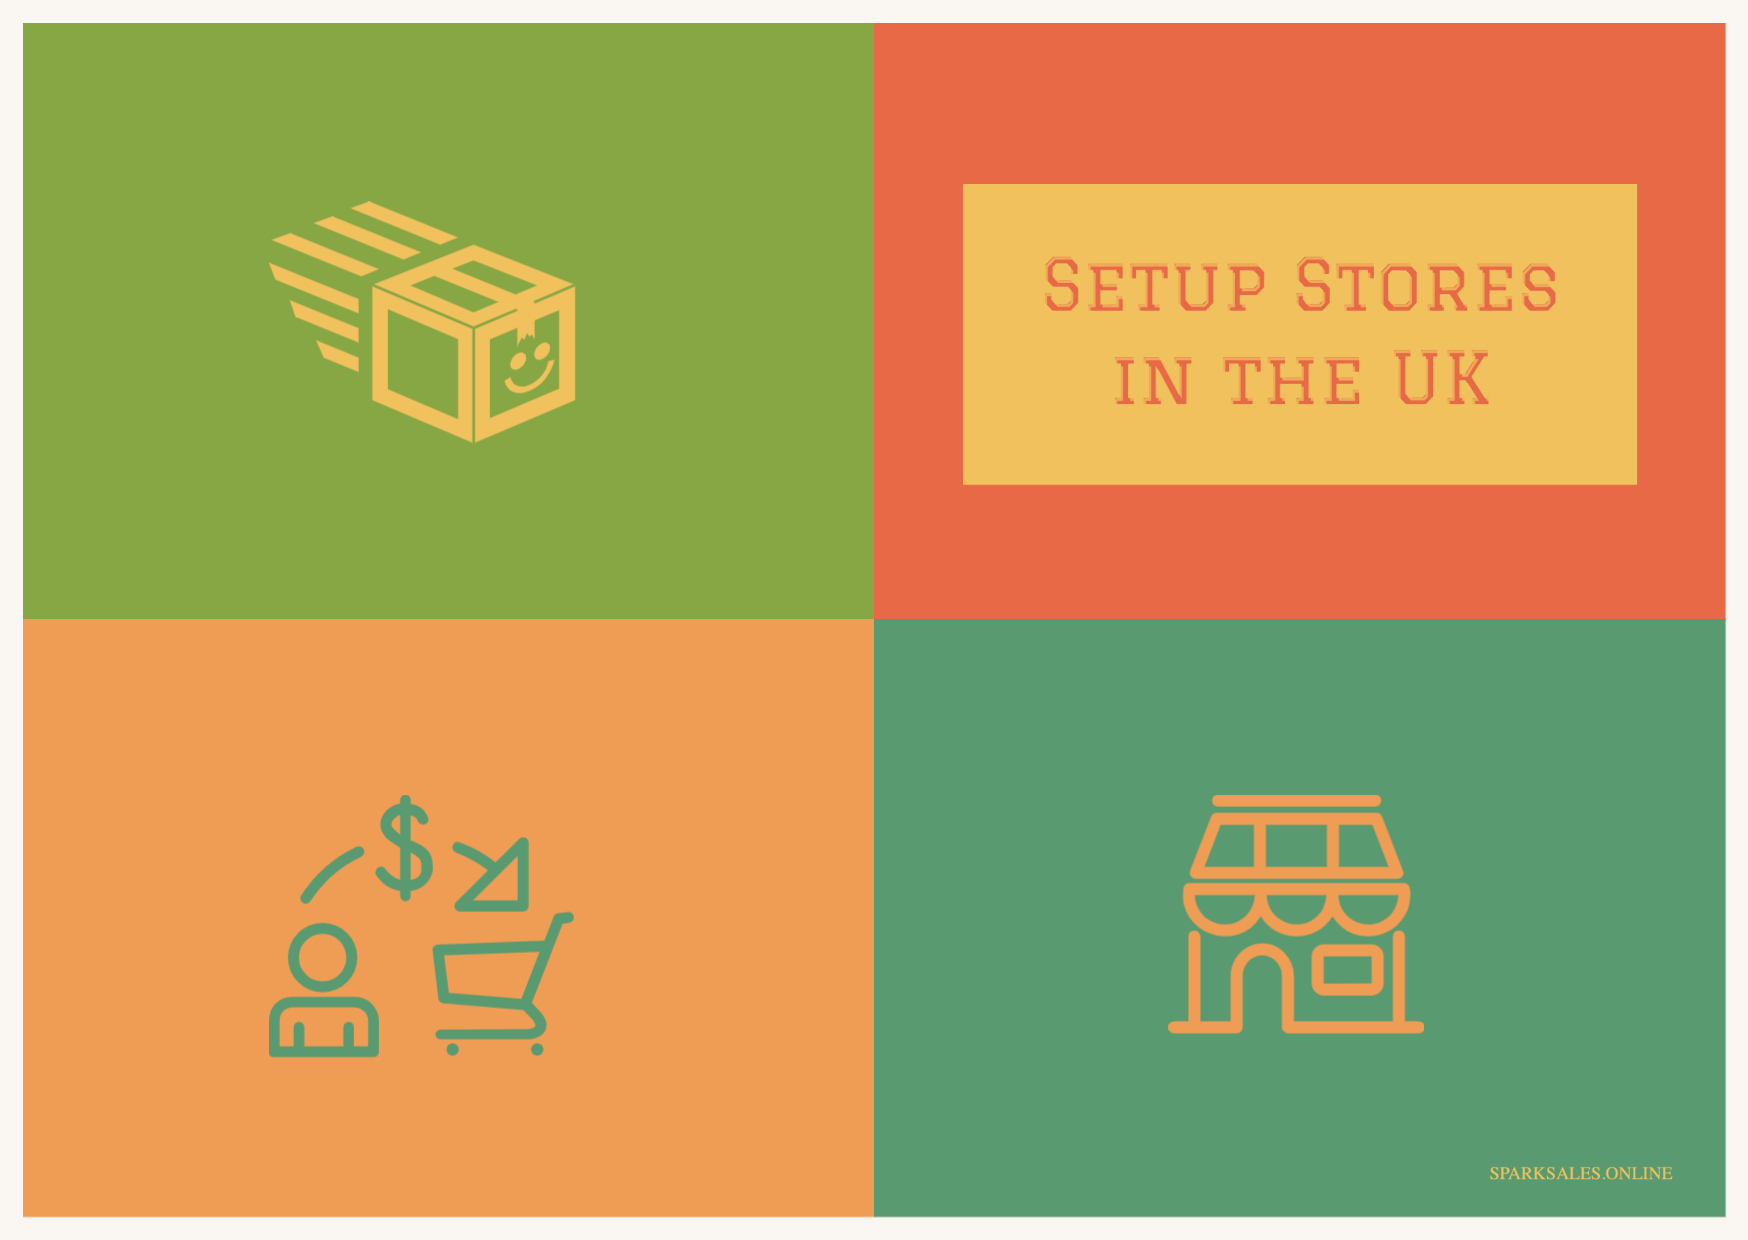 Setup Stores in the UK